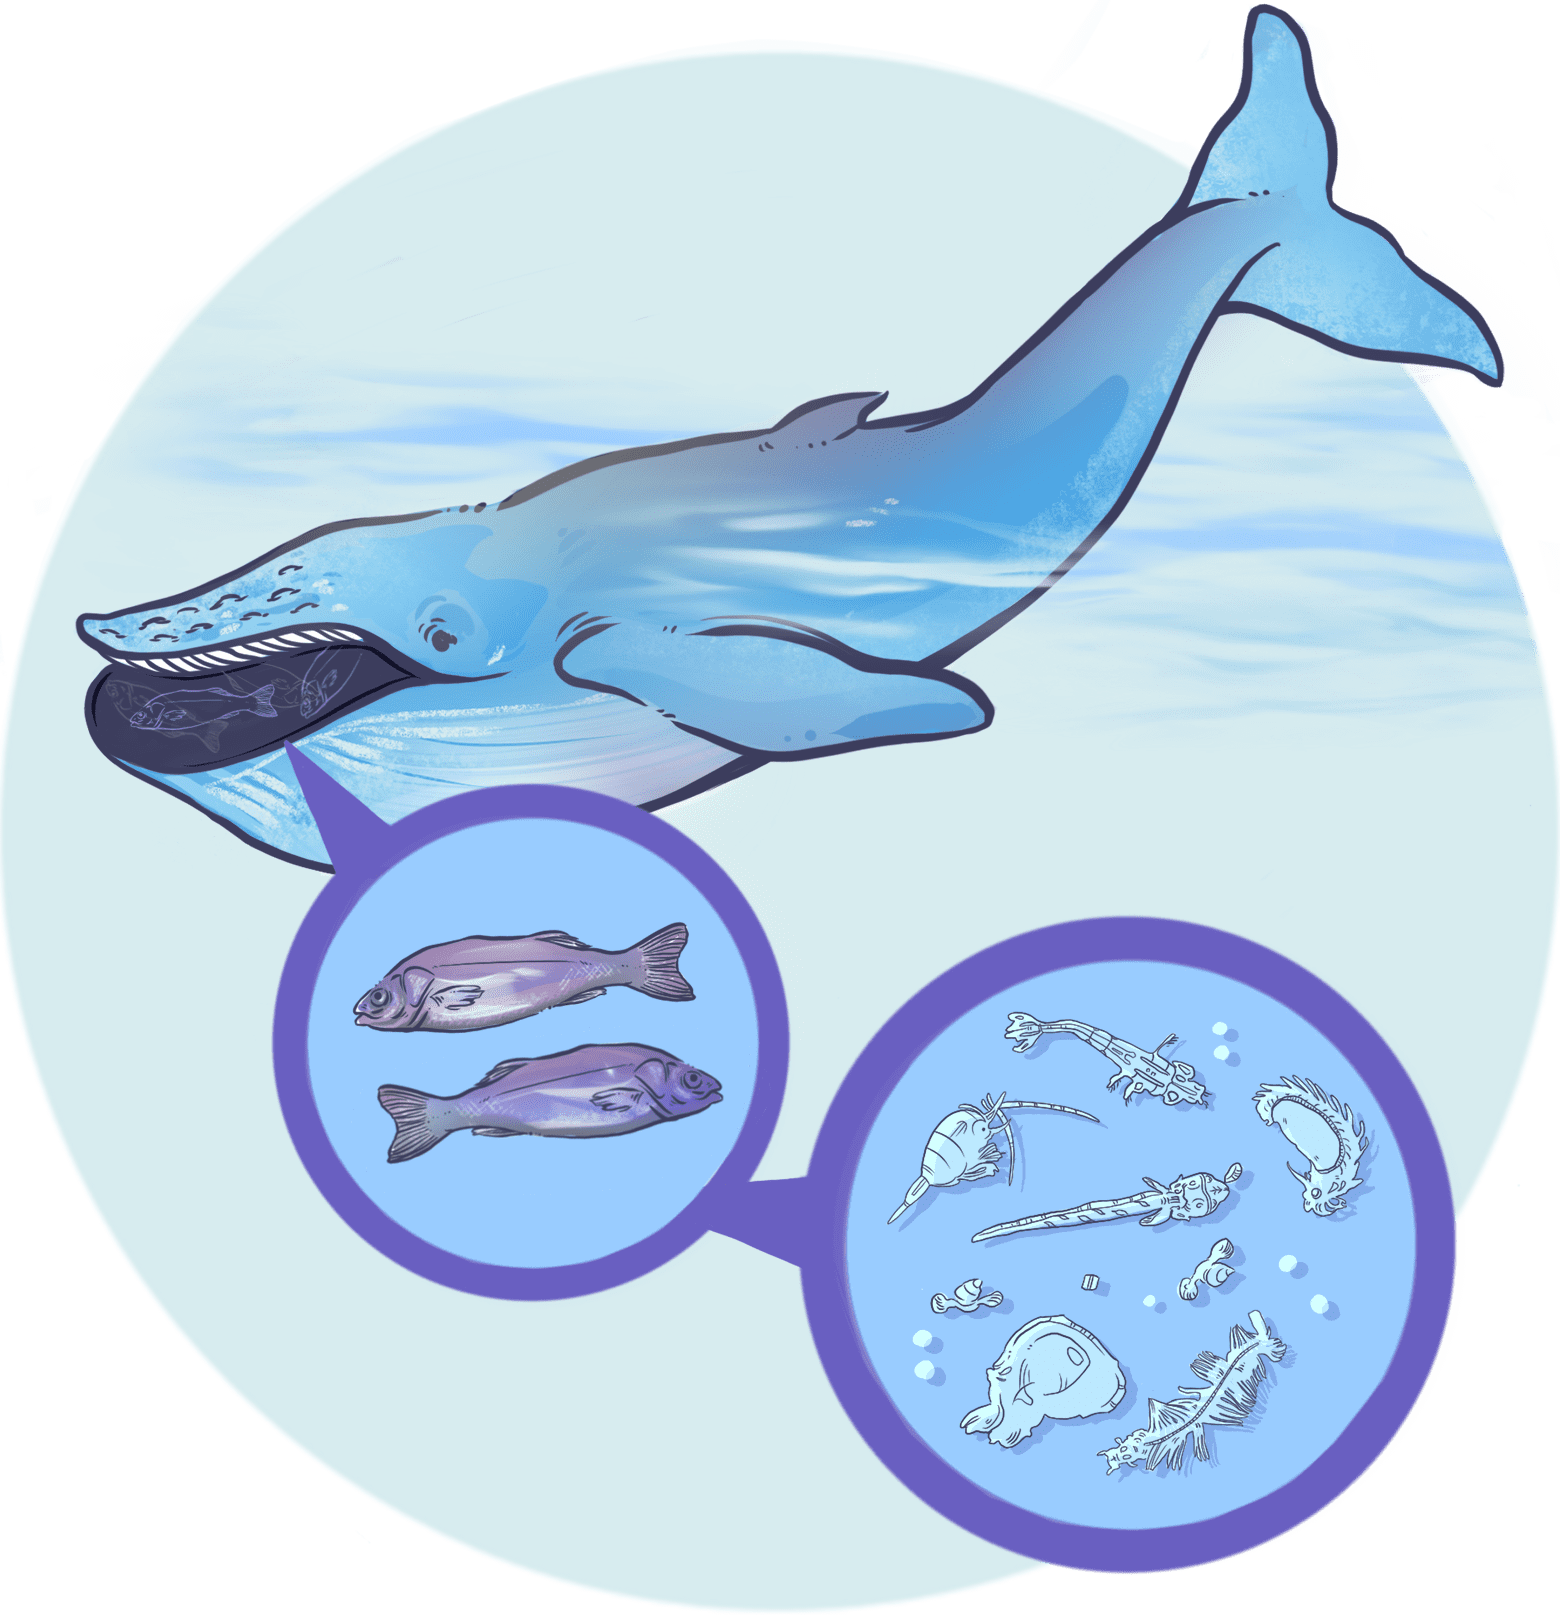 Illustration of a bowhead whale with a bubble showing the fish in its mouth and another bubble showing plankton in the water